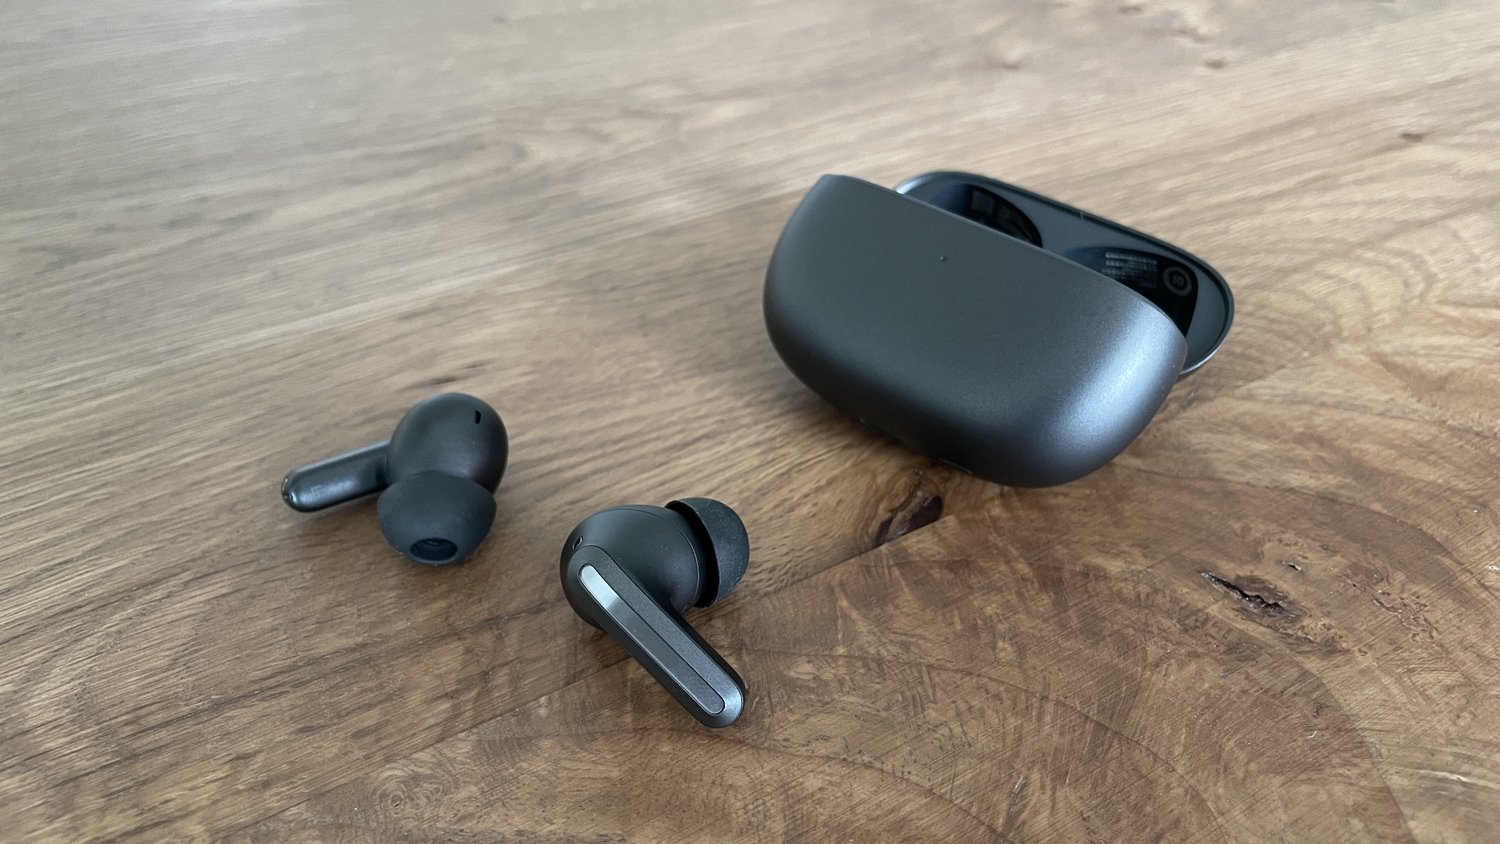 How Do You Connect Your True Wireless Stereo V4.1 Earbuds